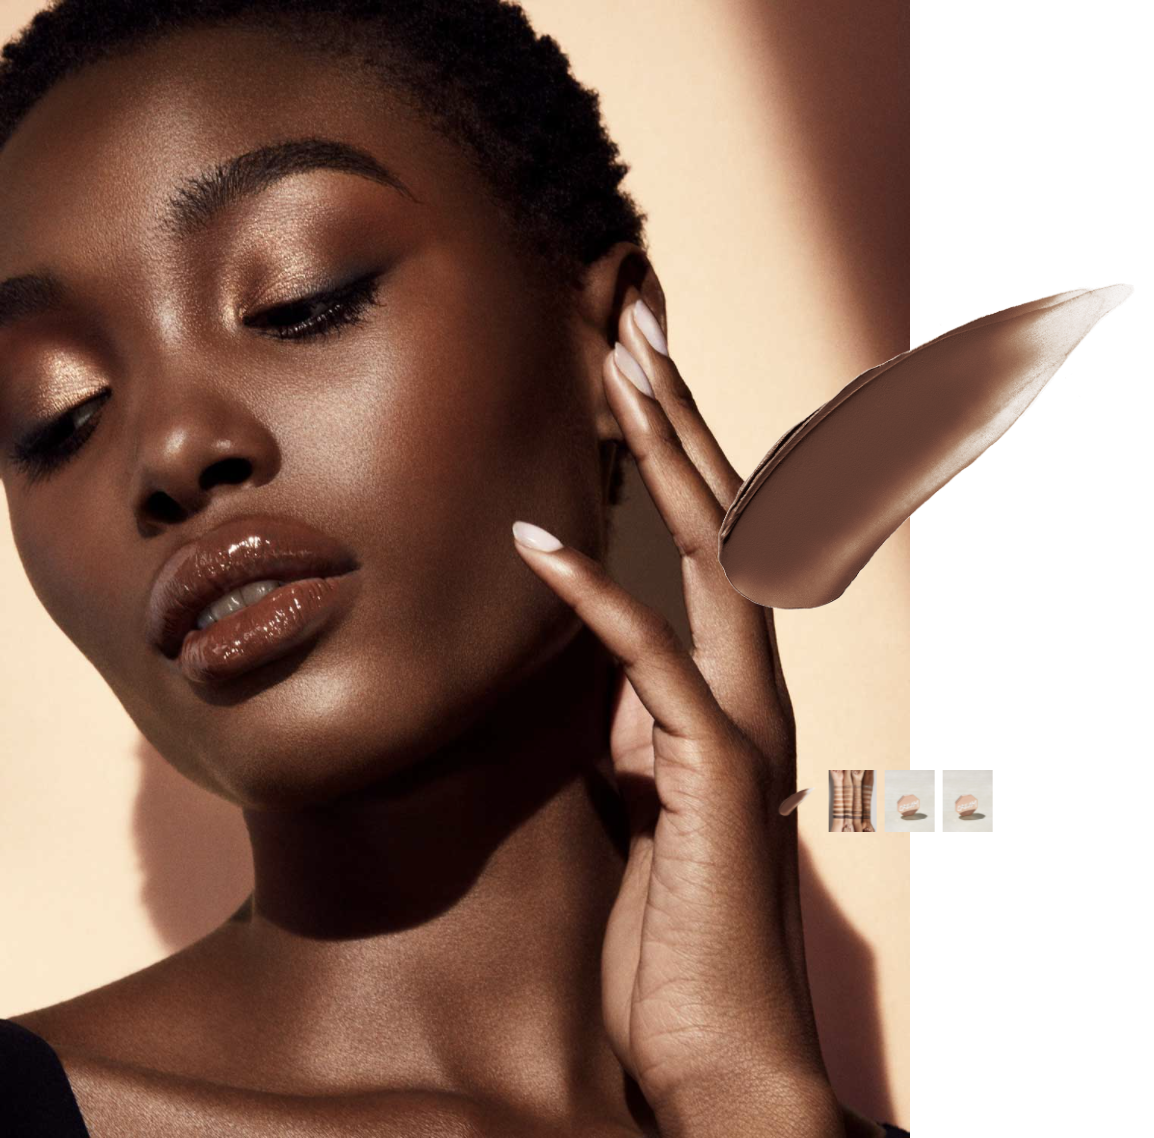 An advertisement for Fenty Beauty’s Cheeks Out Freestyle Cream Bronzer in the shade “Chocolate,” featuring a close-up of a model wearing the product.